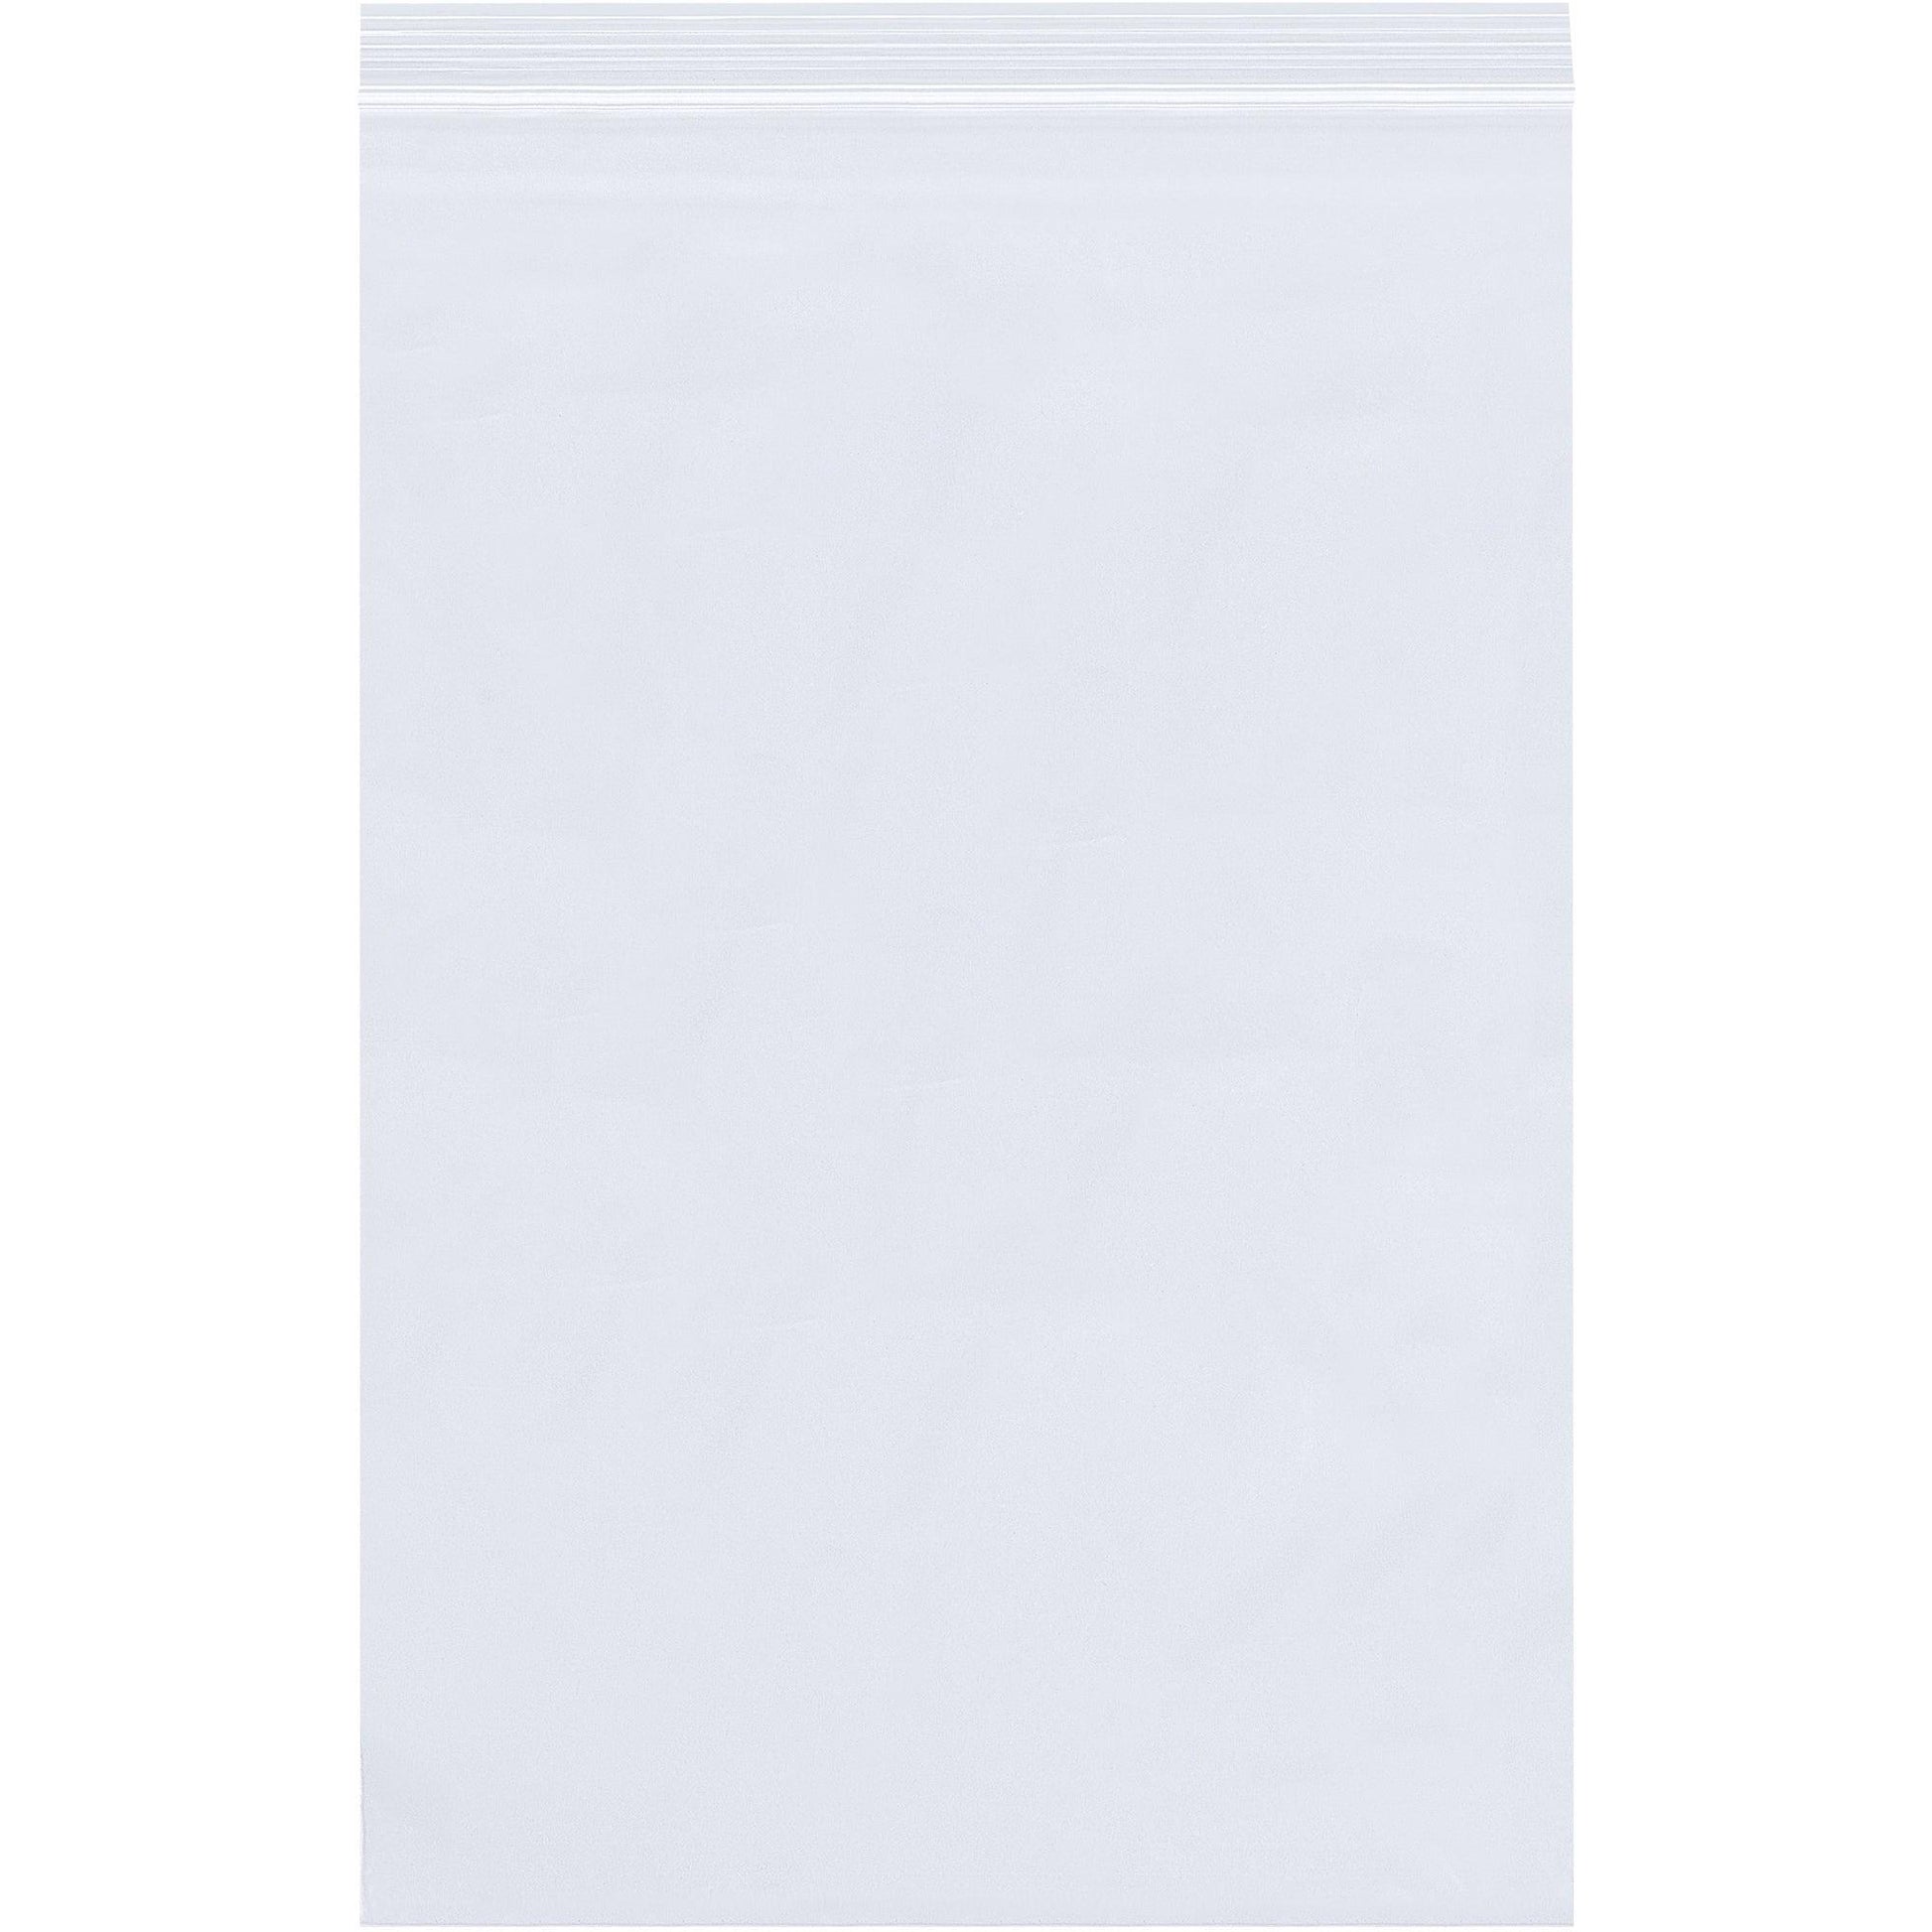 4 x 14" - 2 Mil Reclosable Poly Bags - PB3763